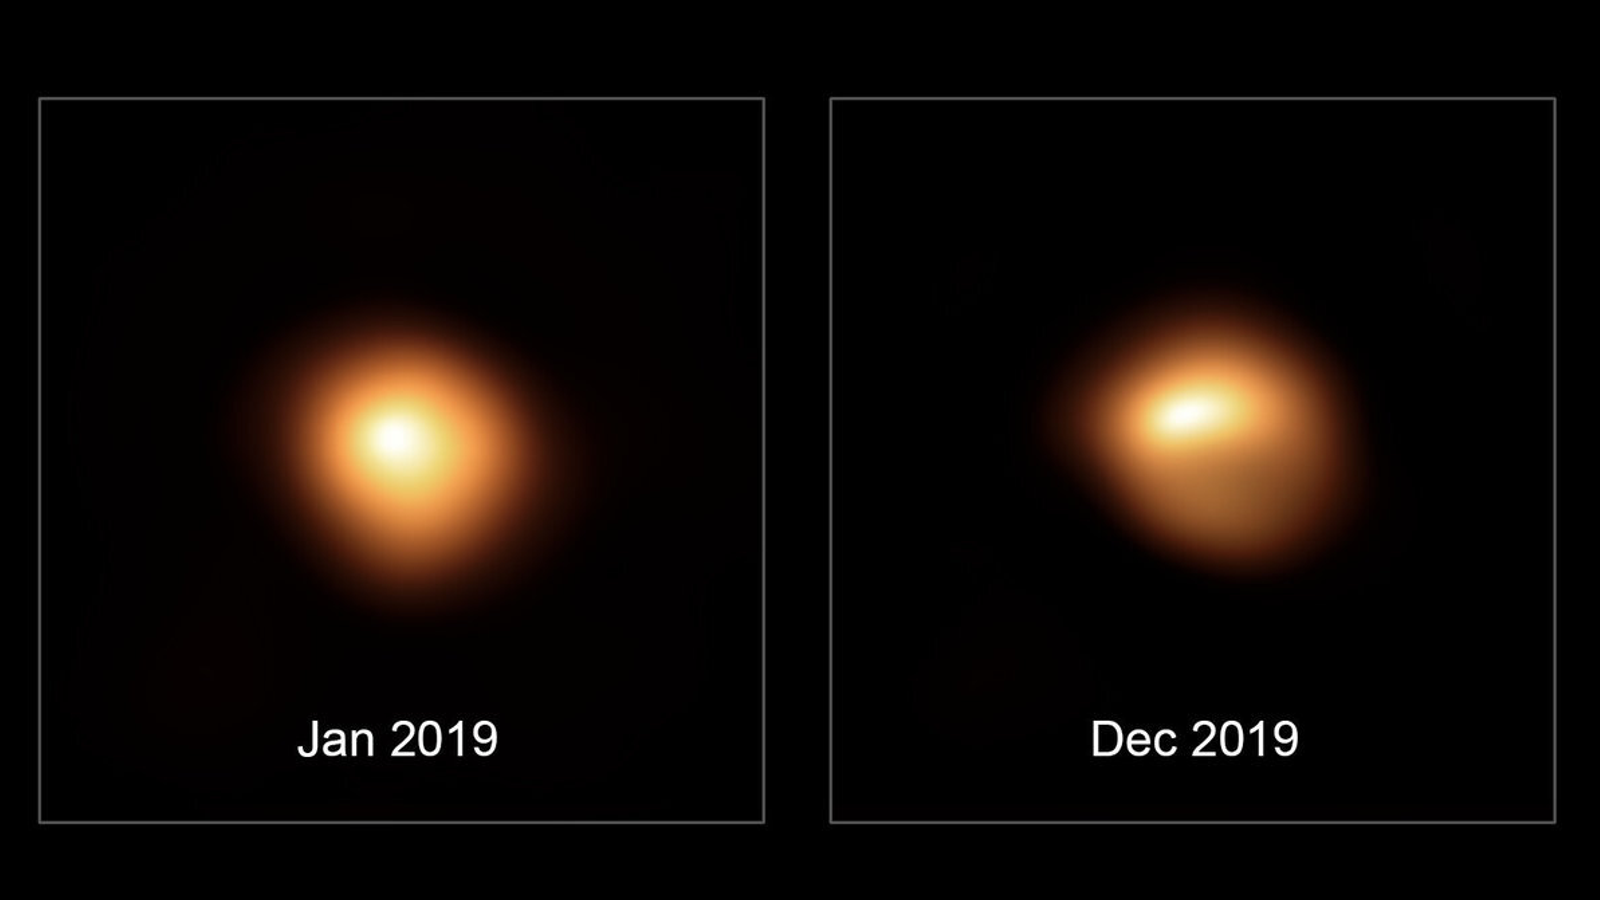 will betelgeuse turn into a black hole